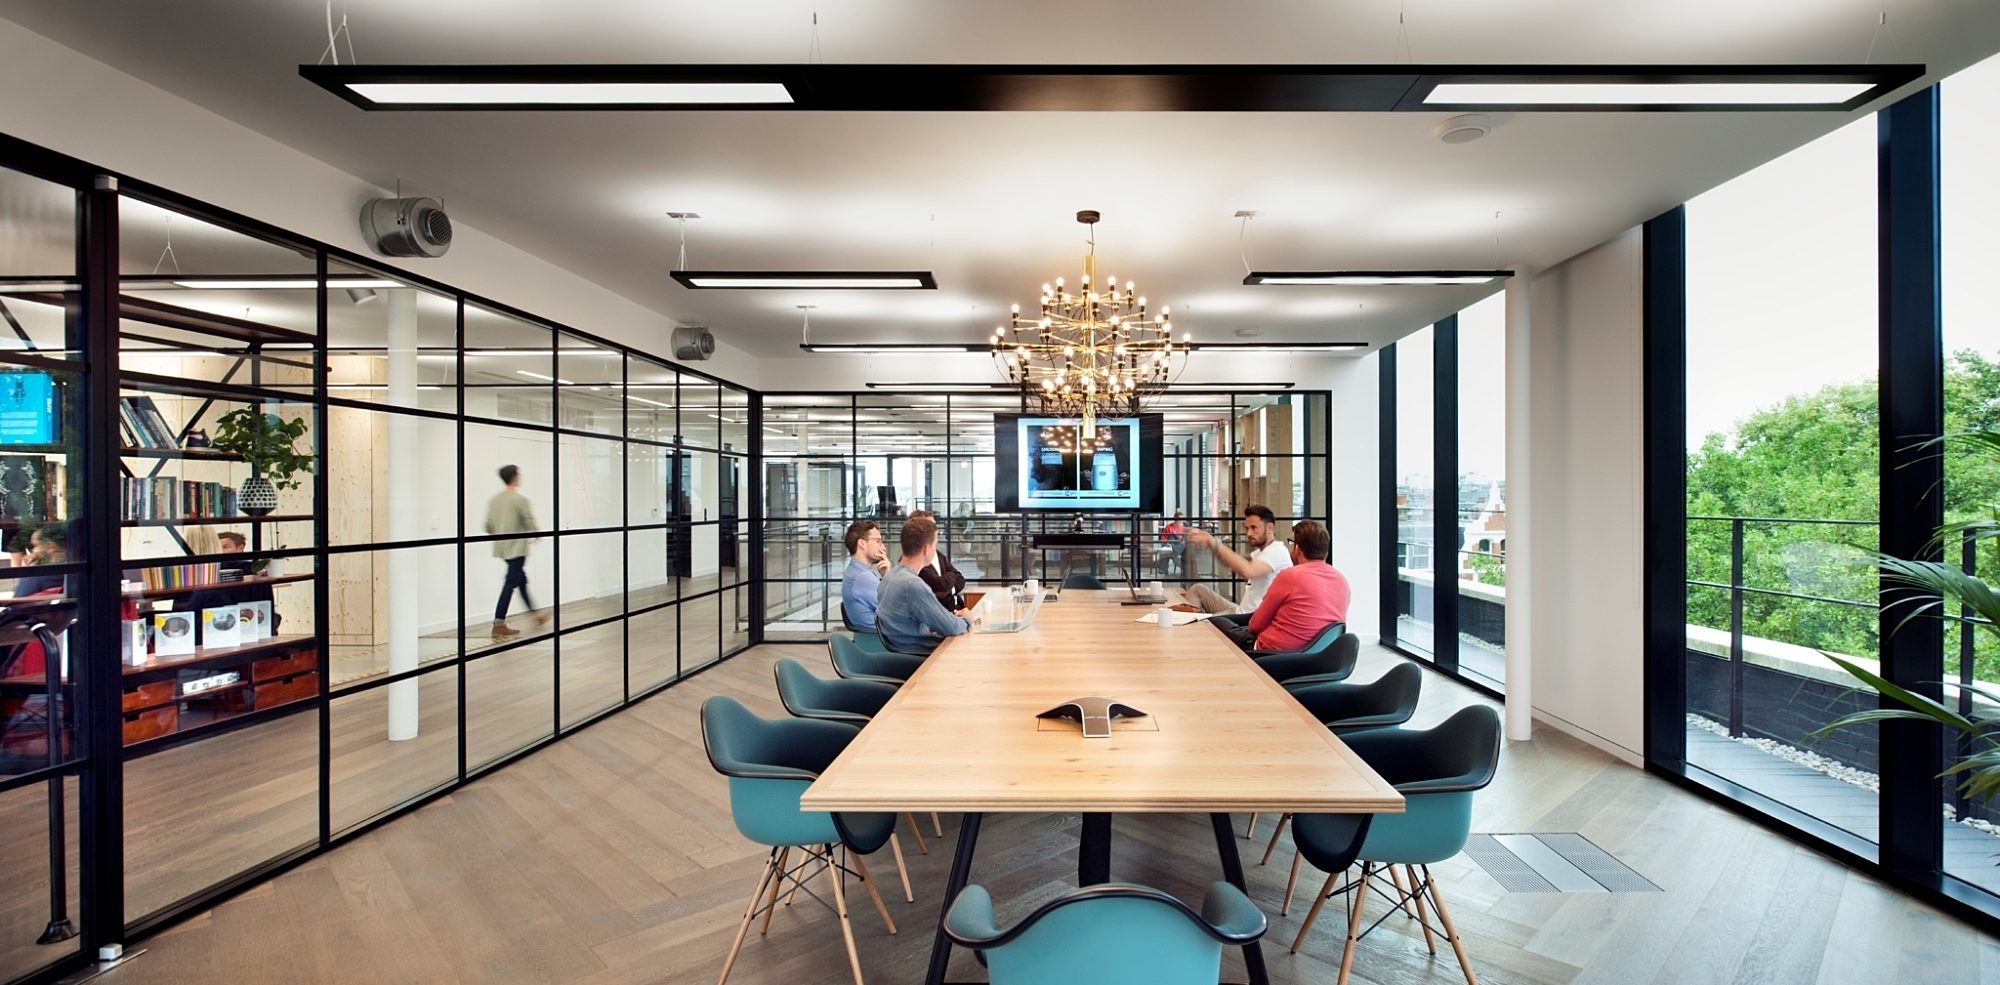 Office boardroom table with natural light and chandelier